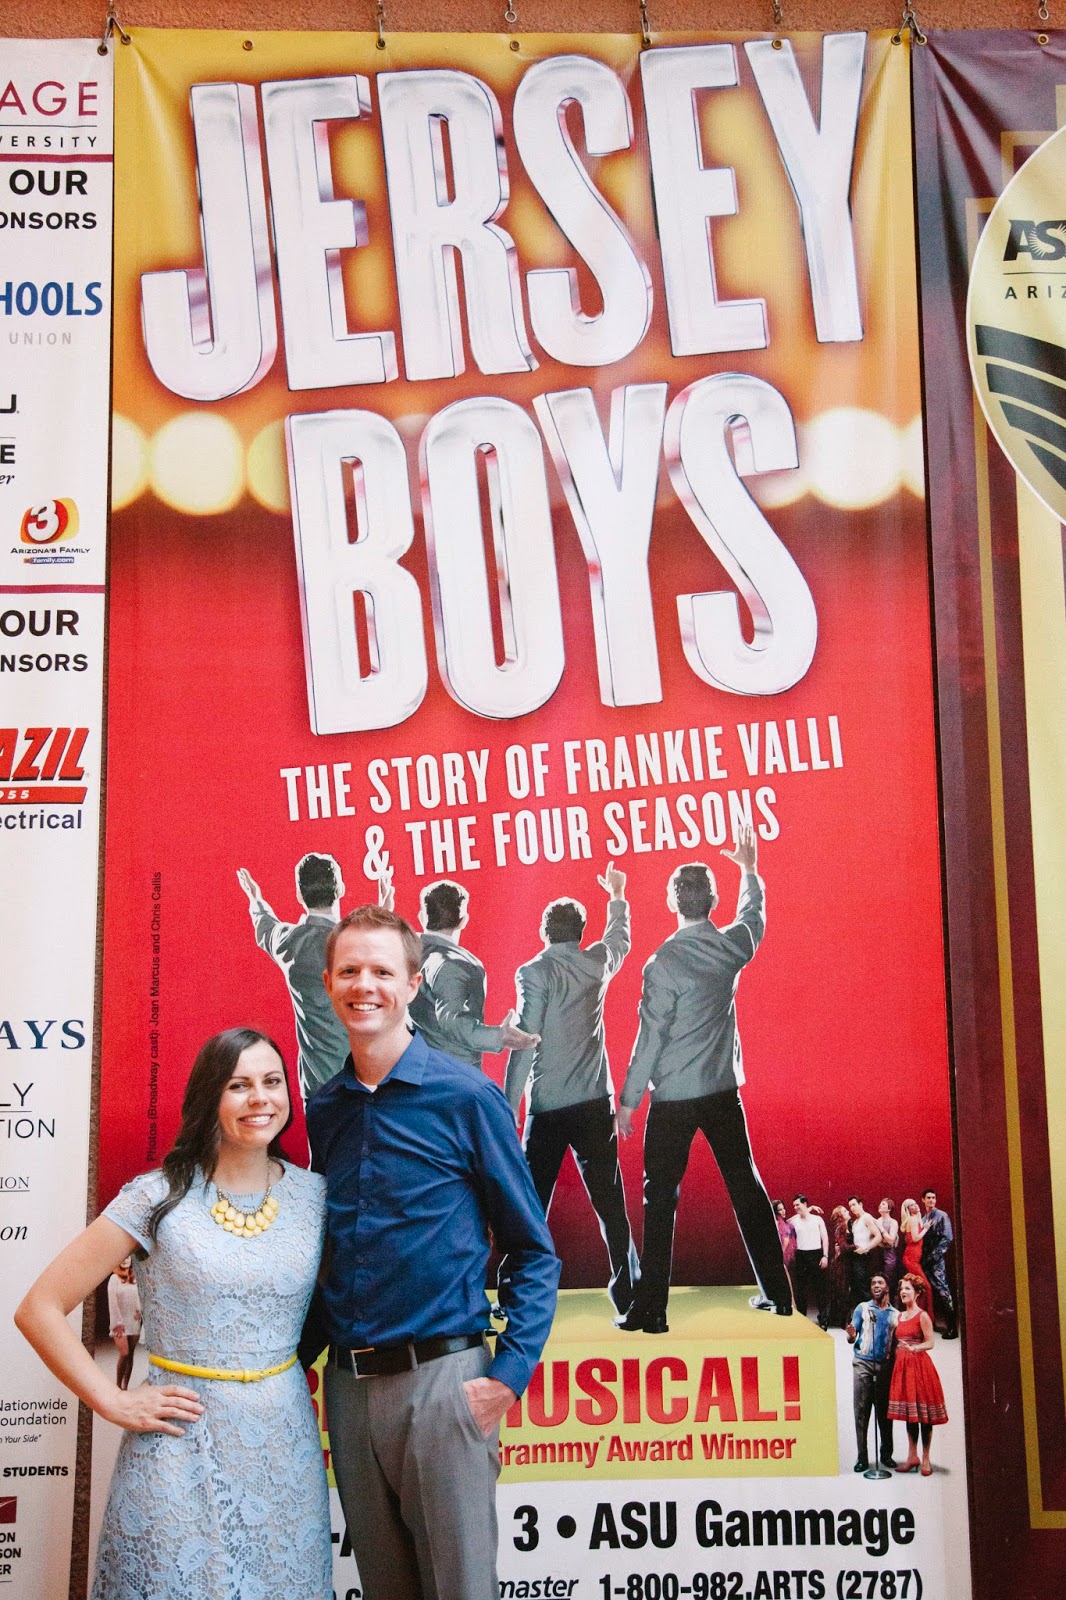 12 Months of Dates: August: Jersey Boys